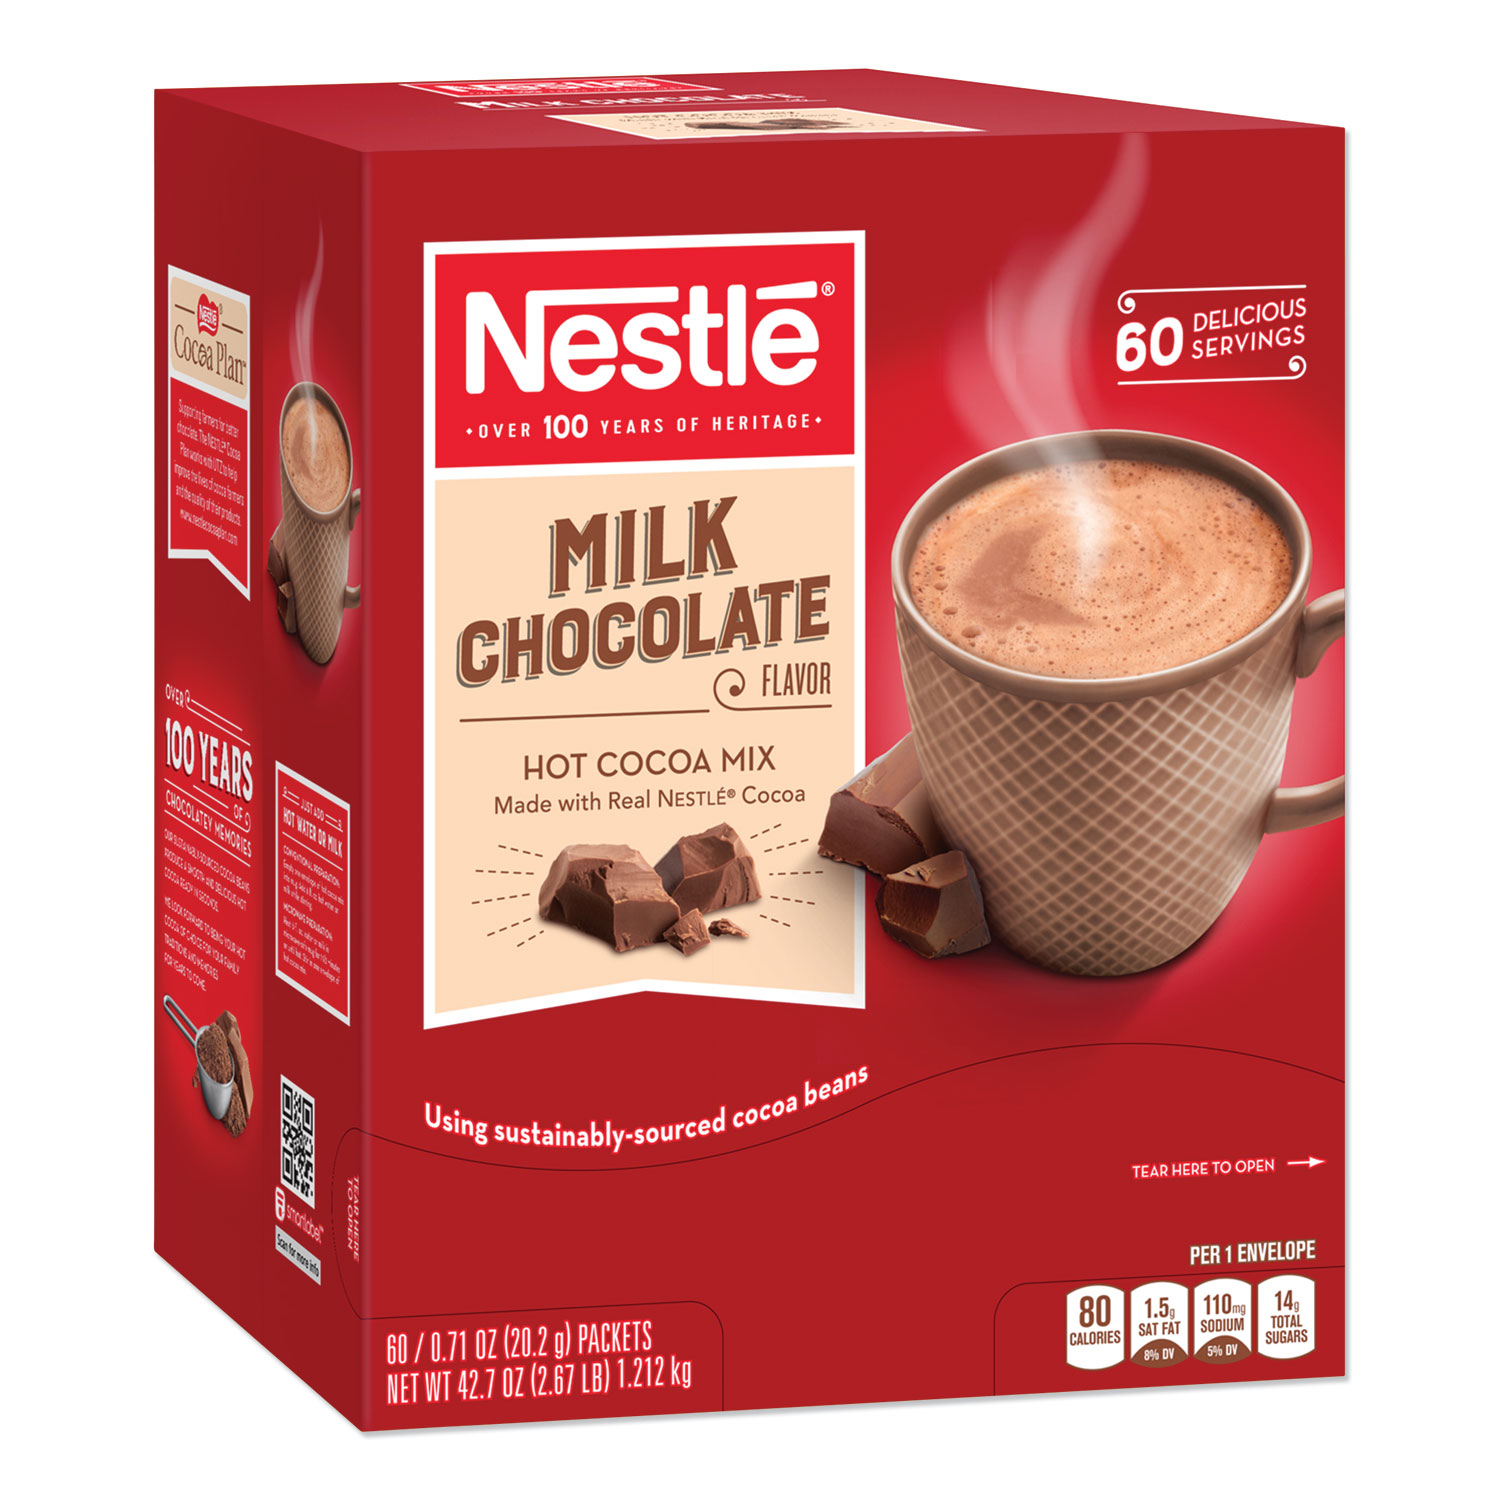  Nestlé NES26791 Hot Cocoa Mix, Milk Chocolate, 0.71 oz Packet, 60 Packets/Box (NES24372868) 